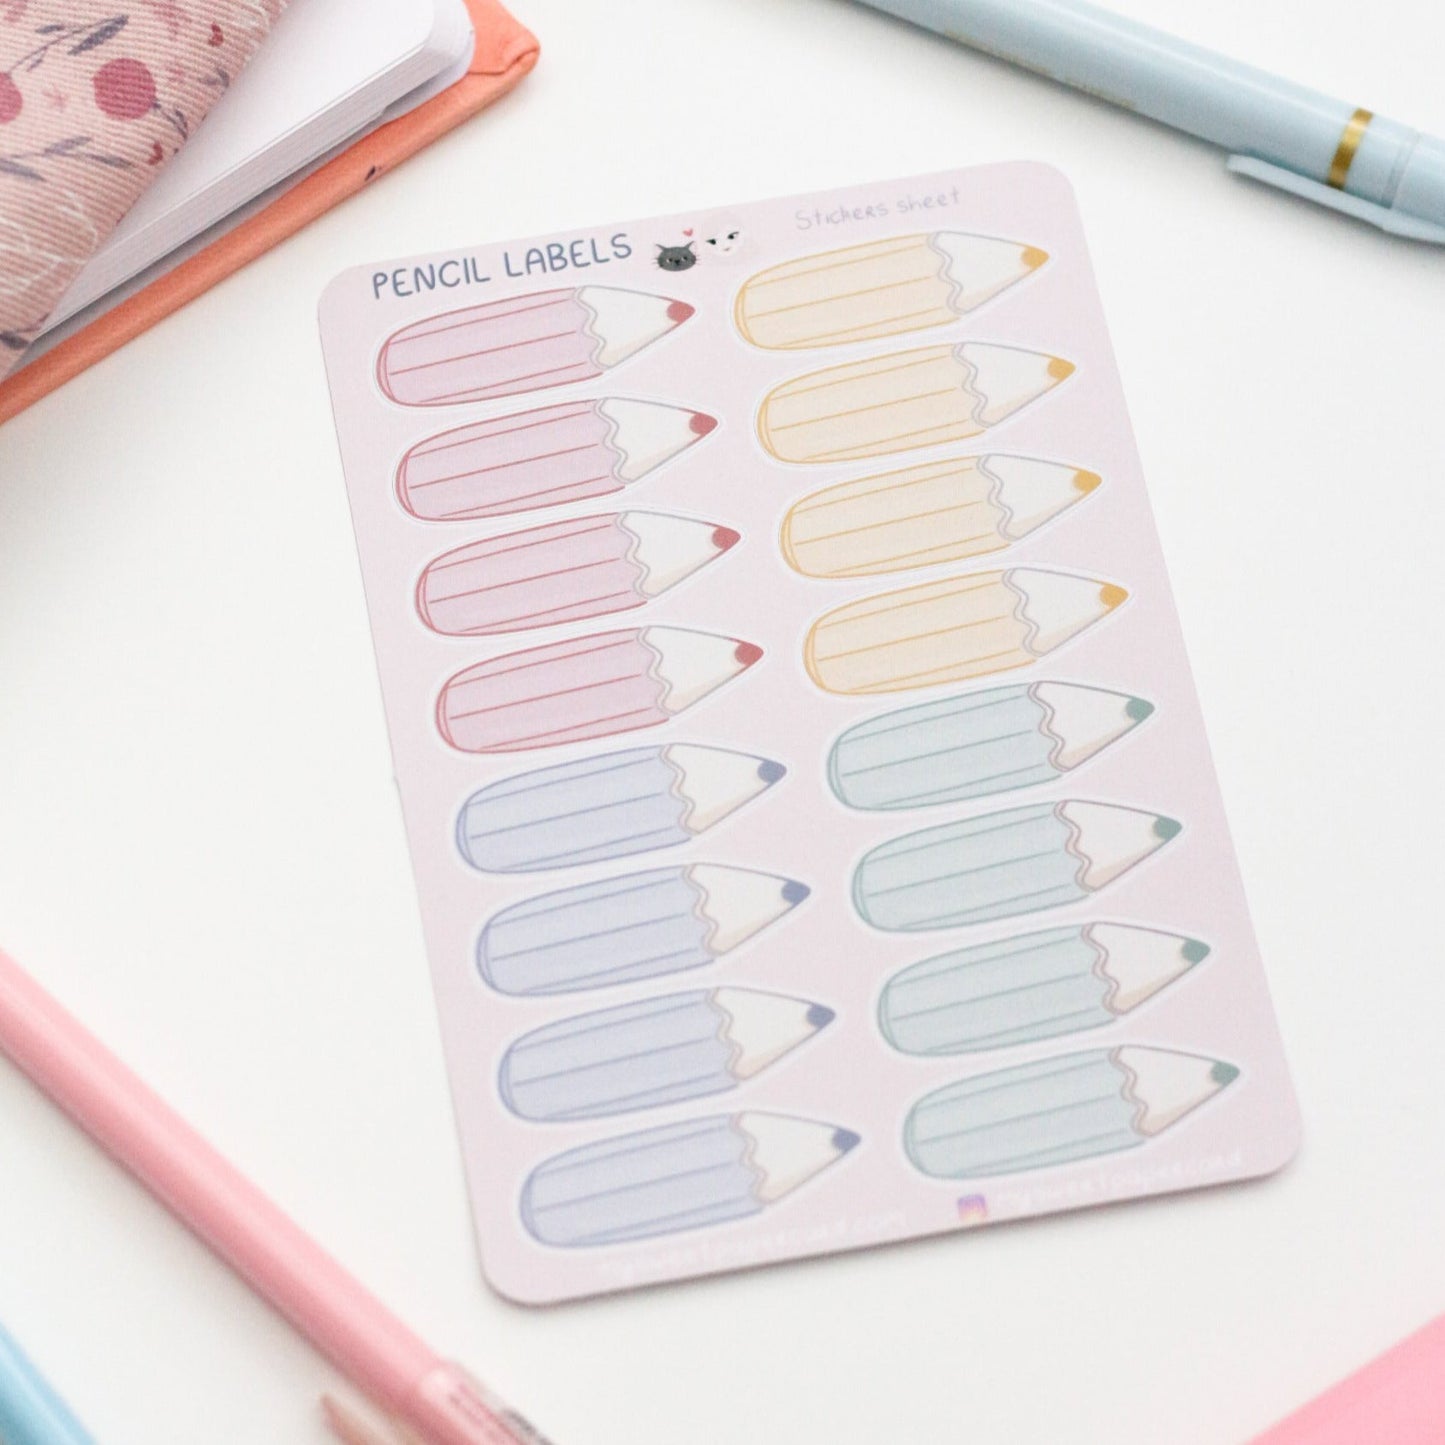 2ND SALE - Pastel pencil stickers - Name labels for school supplies - Back to school stickers